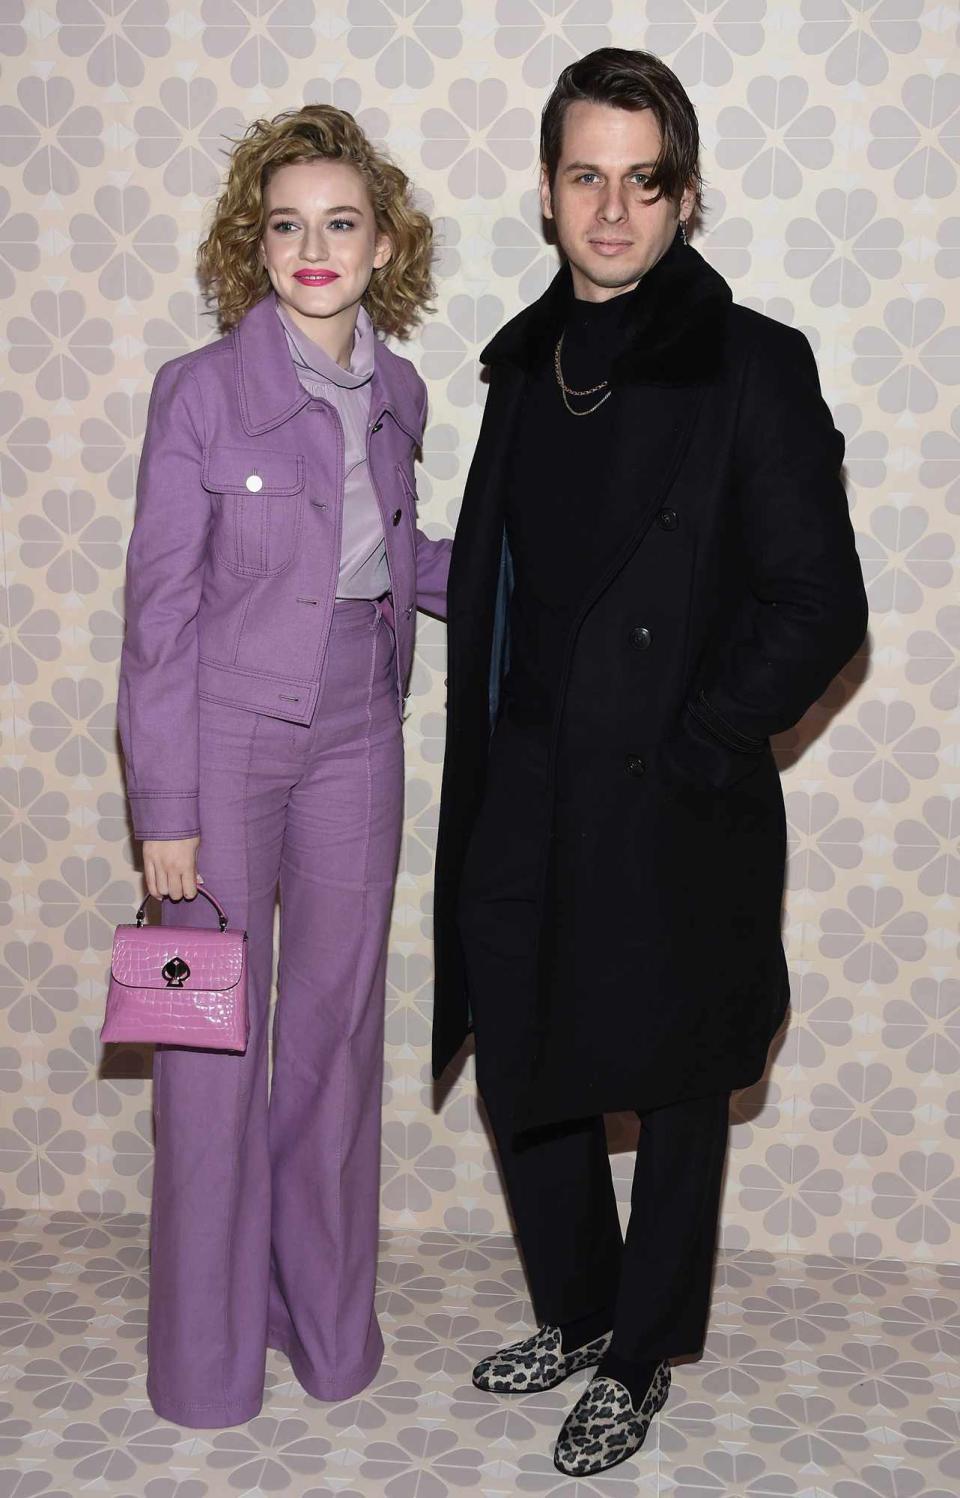 Julia Garner and Mark Foster attend the Kate Spade Fashion Show during New York Fashion Week at Cipriani 25 Broadway on February 8, 2019 in New York City